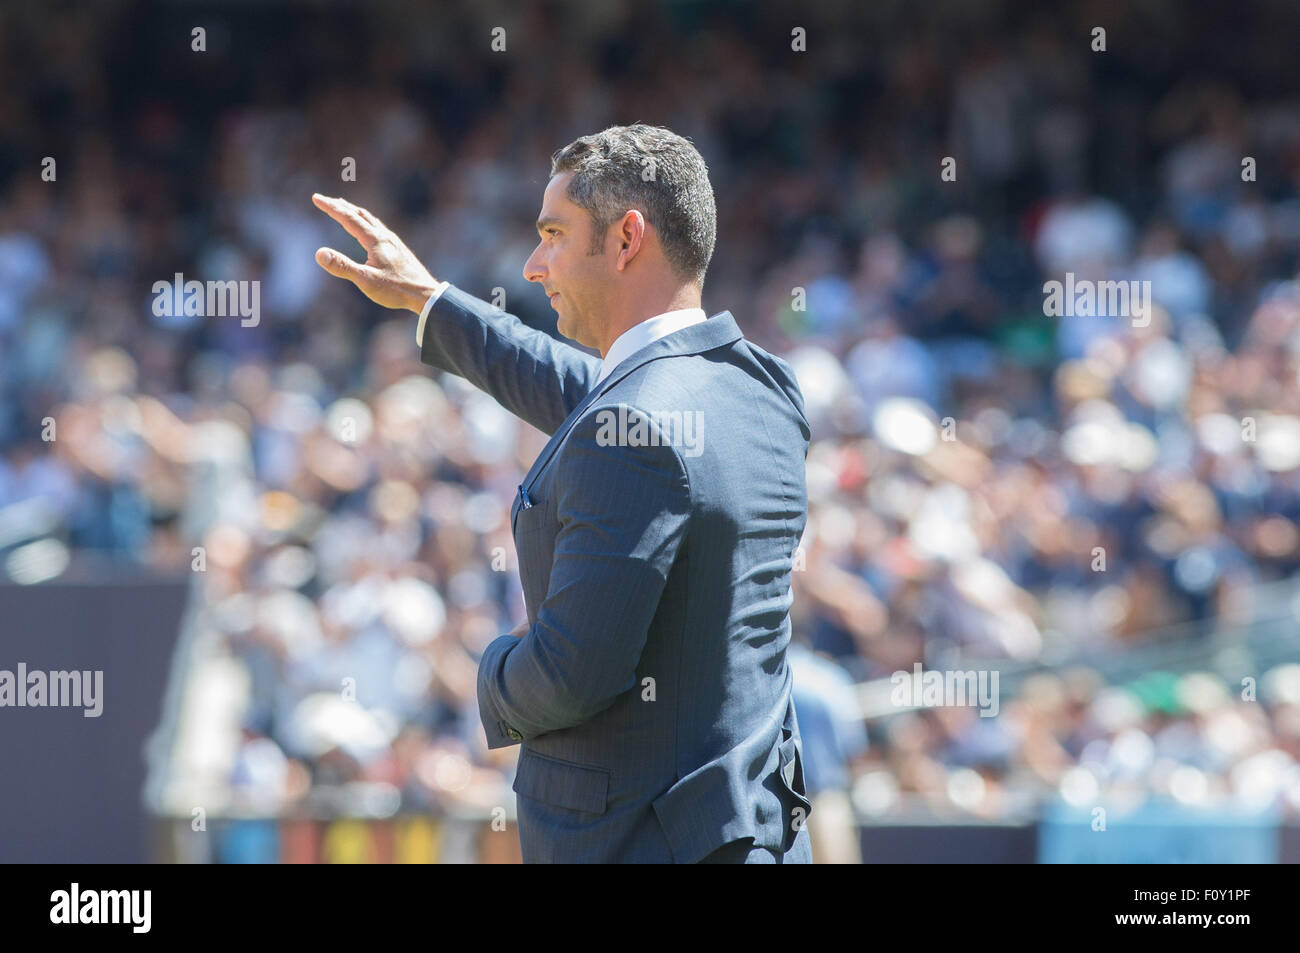 New York, New York, USA. 22nd Aug, 2015. Former Yankees' catcher JORGE POSADA is honored with a plaque in Monument Park prior to the NY Yankees vs. Cleveland Indians, Yankee Stadium, Saturday August 22, 2015. Credit:  Bryan Smith/ZUMA Wire/Alamy Live News Stock Photo